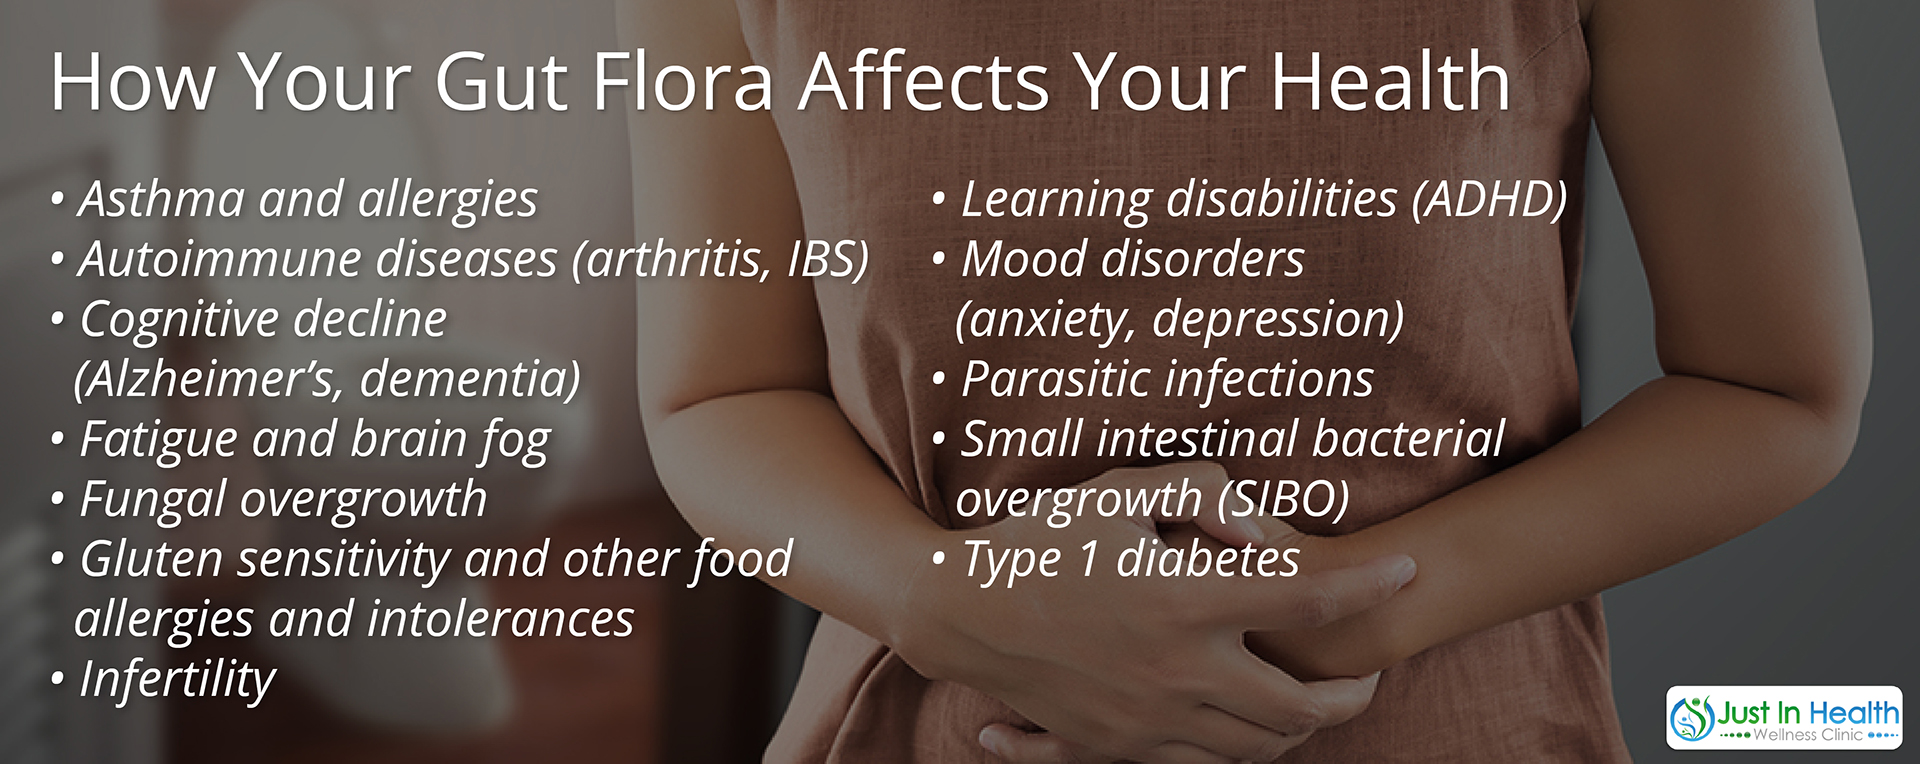 How Your Gut Flora Affects Your Health